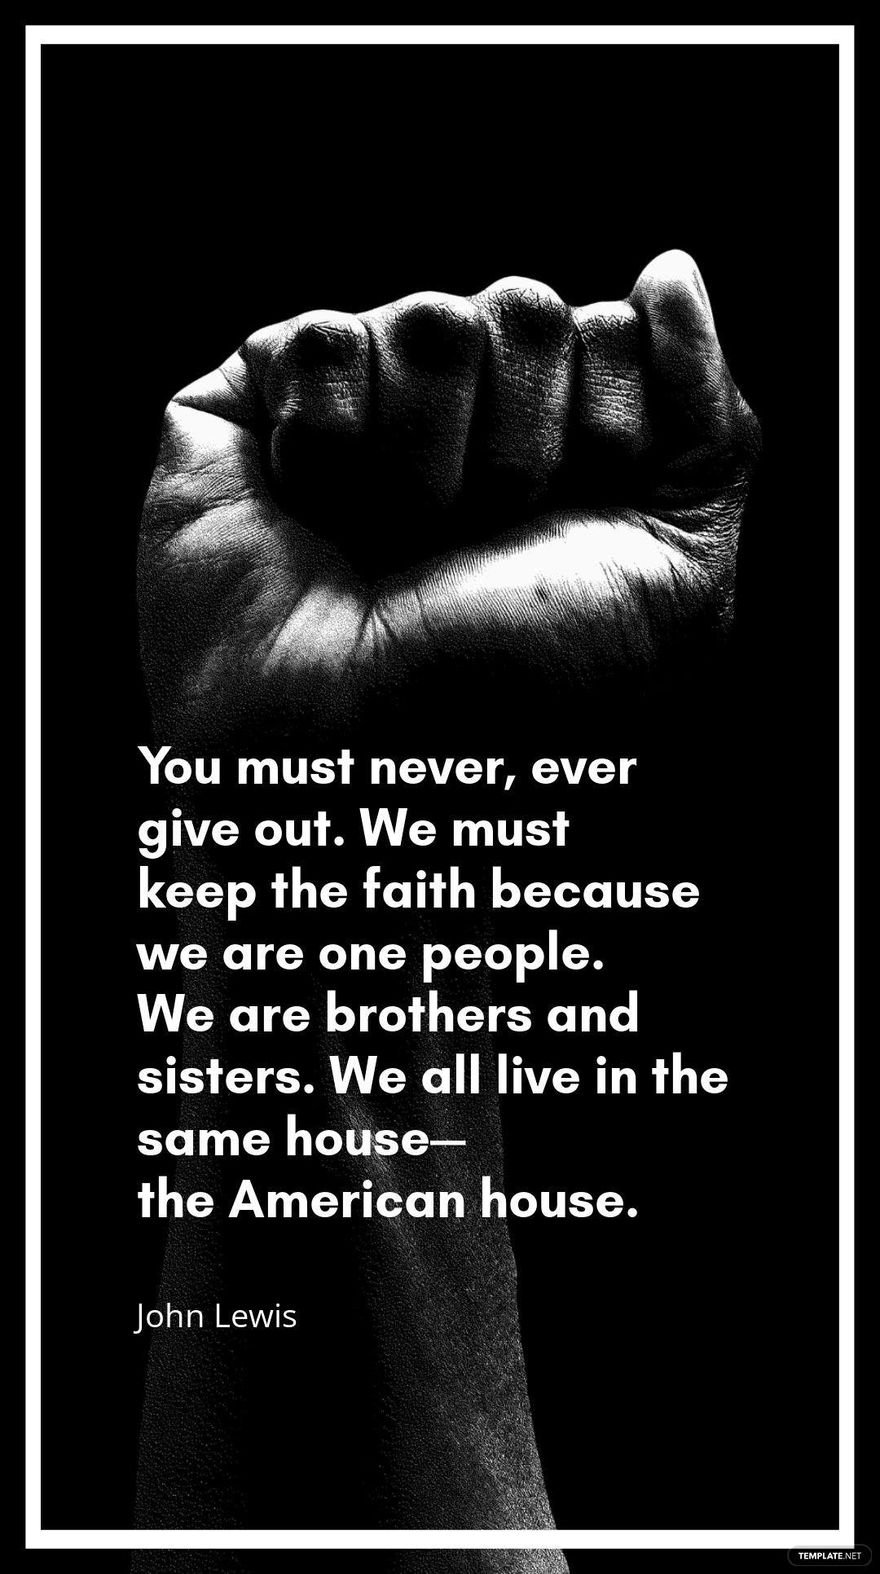 John Lewis - You must never, ever give out. We must keep the faith because we are one people. We are brothers and sisters. We all live in the same house—the American house.